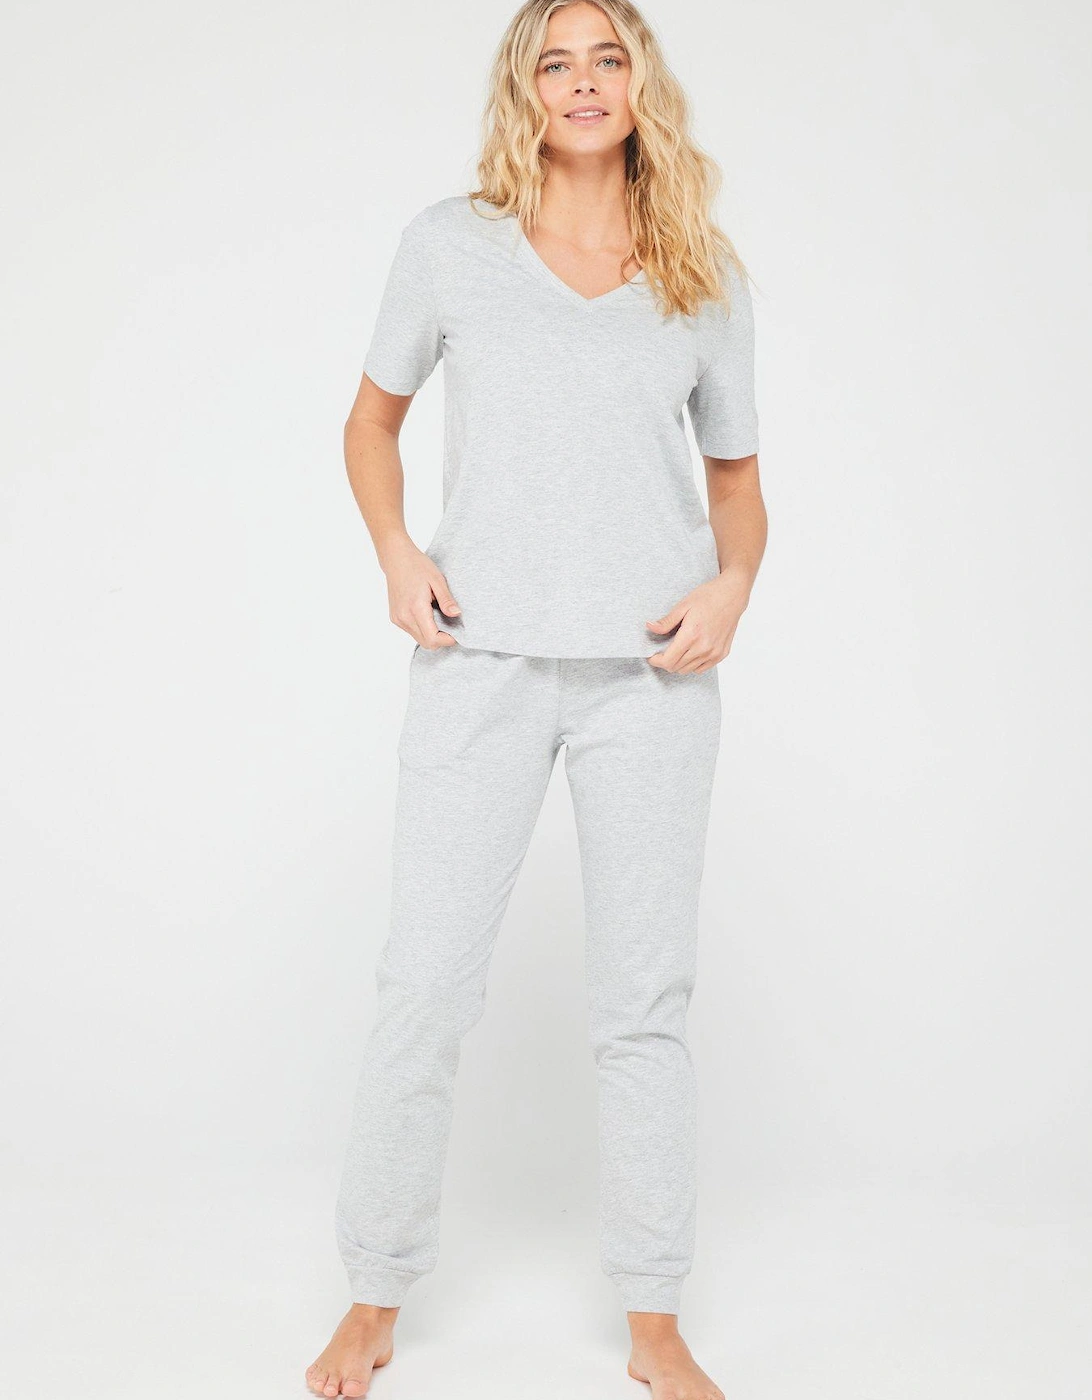 Mid Sleeve V Neck Top And Jogger Pj Set